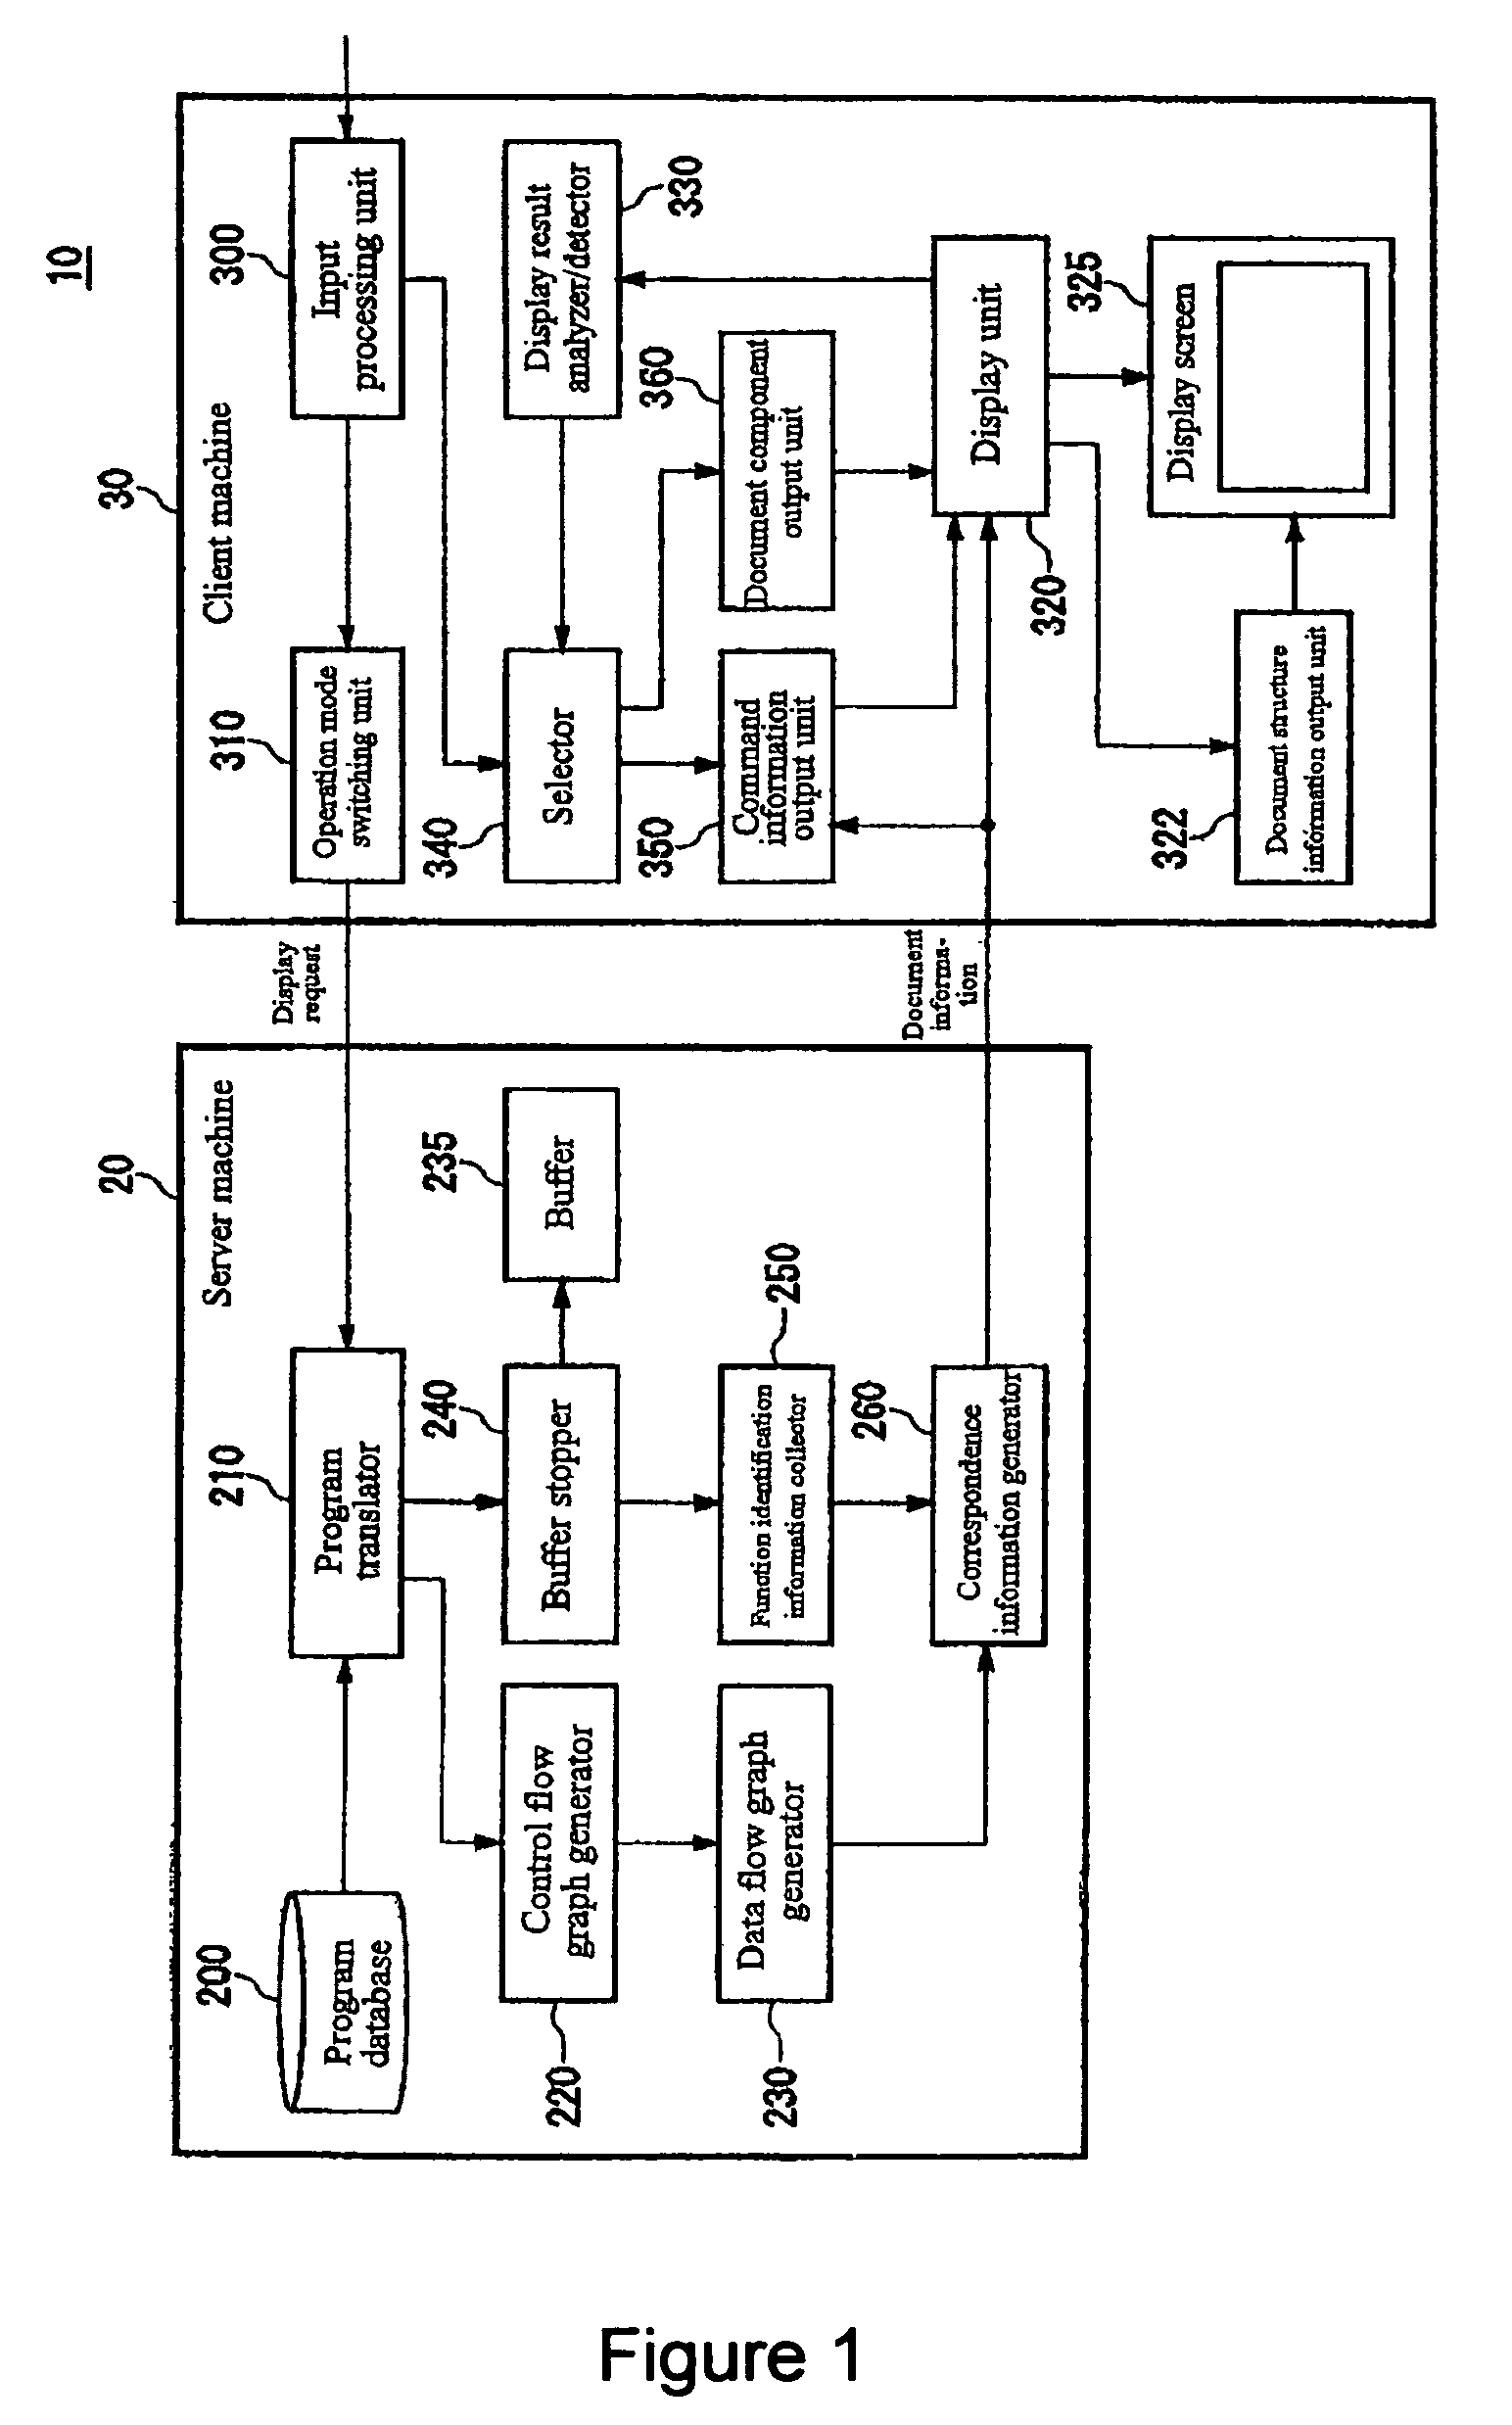 Method for generating document components and managing same